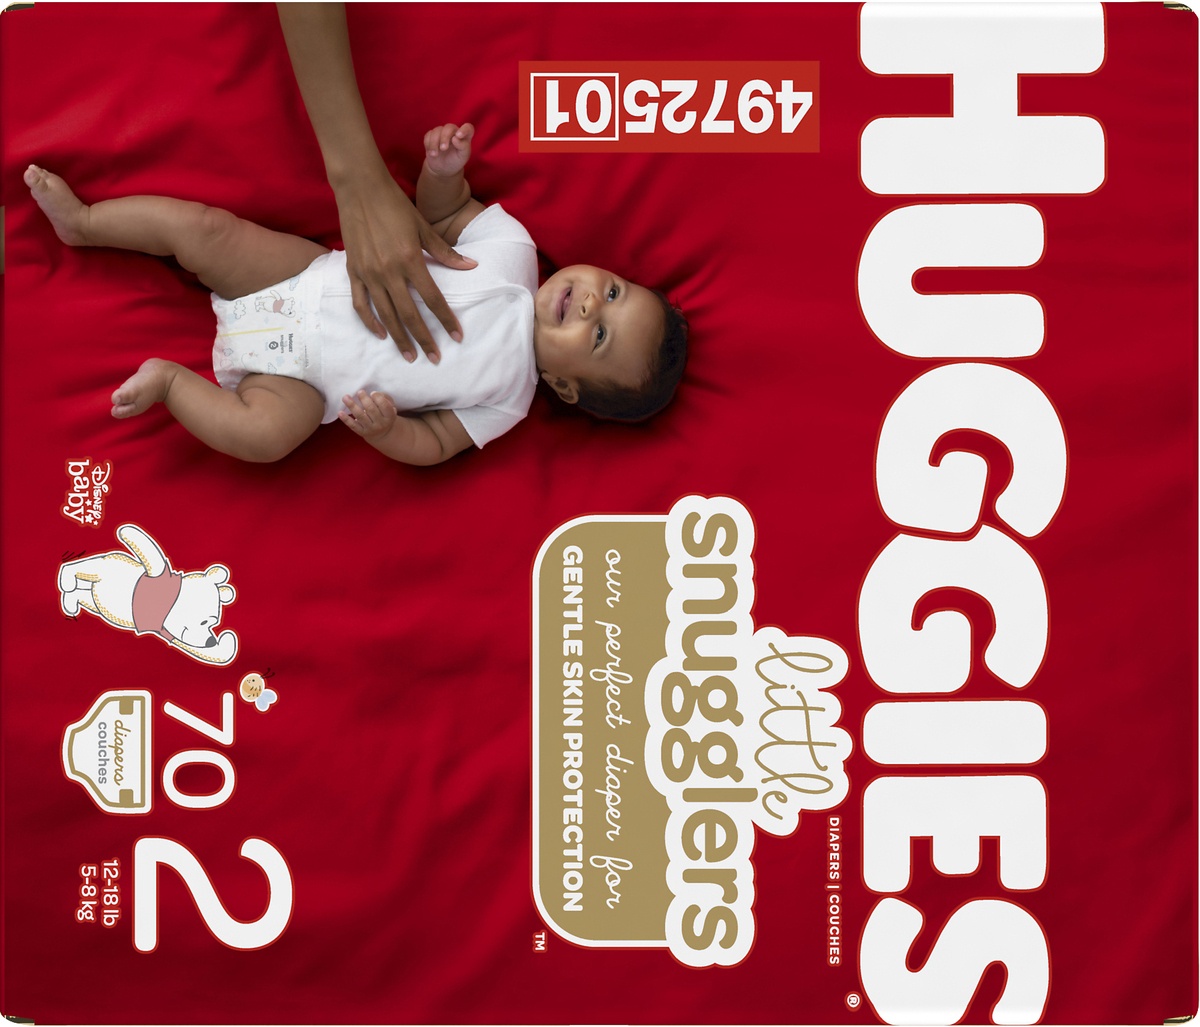 Huggies Little Snugglers Diapers, Size 2 (12-18 lb), Disney Baby, Diapers